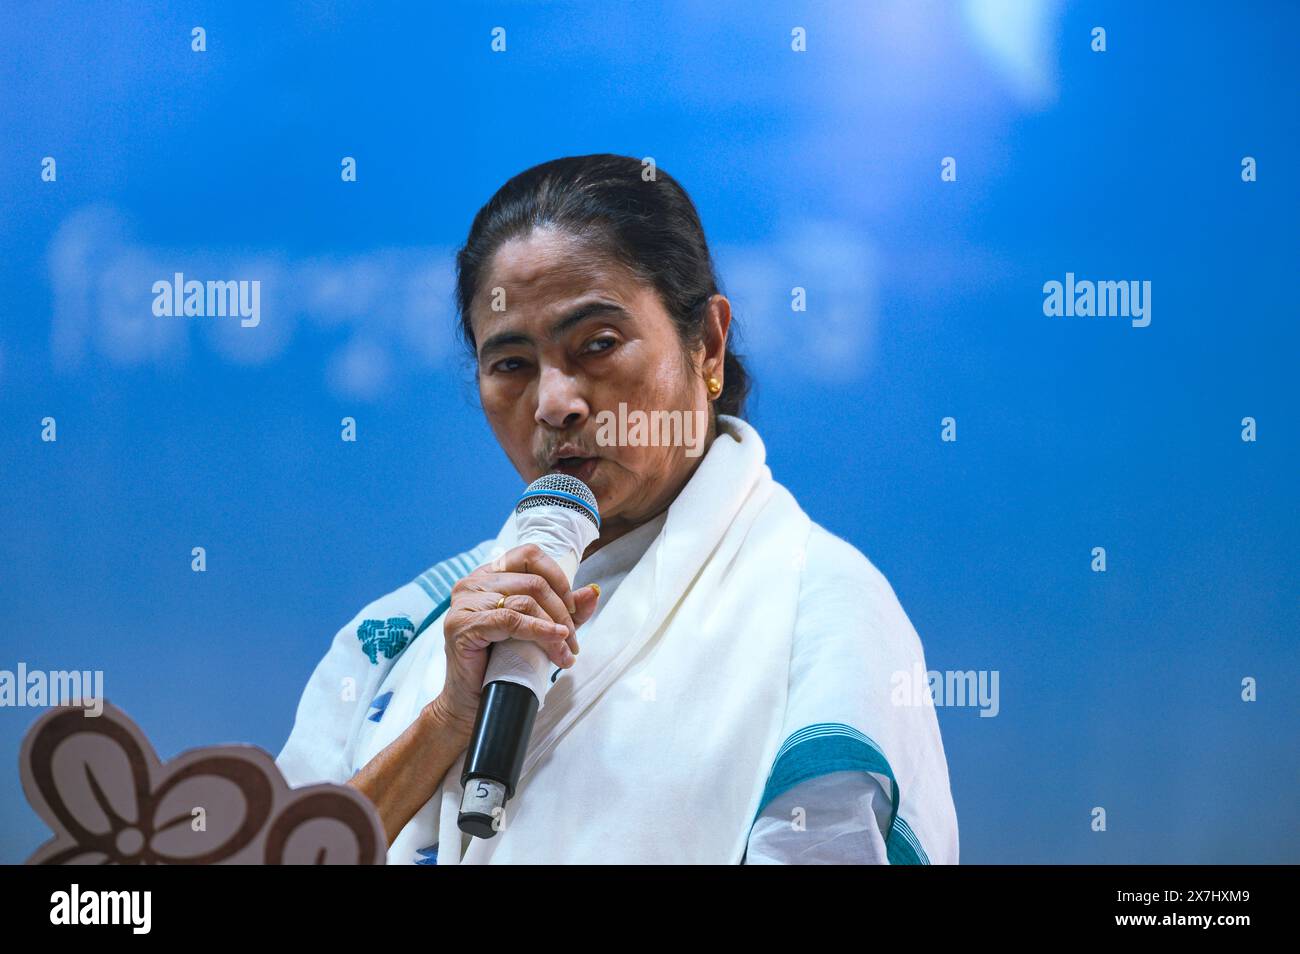 West Bengal's Chief Minister Mamata Banerjee, is the only female chief minister in India now. She is also the leader of the Trinamool Congress (TMC) party who served twice as Minister of Railways and multiple times as a Union Cabinet Minister. The CM is seen speaking at a public meeting during an election campaign rally in support of Indian MP Mahua Moitra at the Harichand Guruchand Stadium. Tehatta, West Bengal. India. Stock Photo